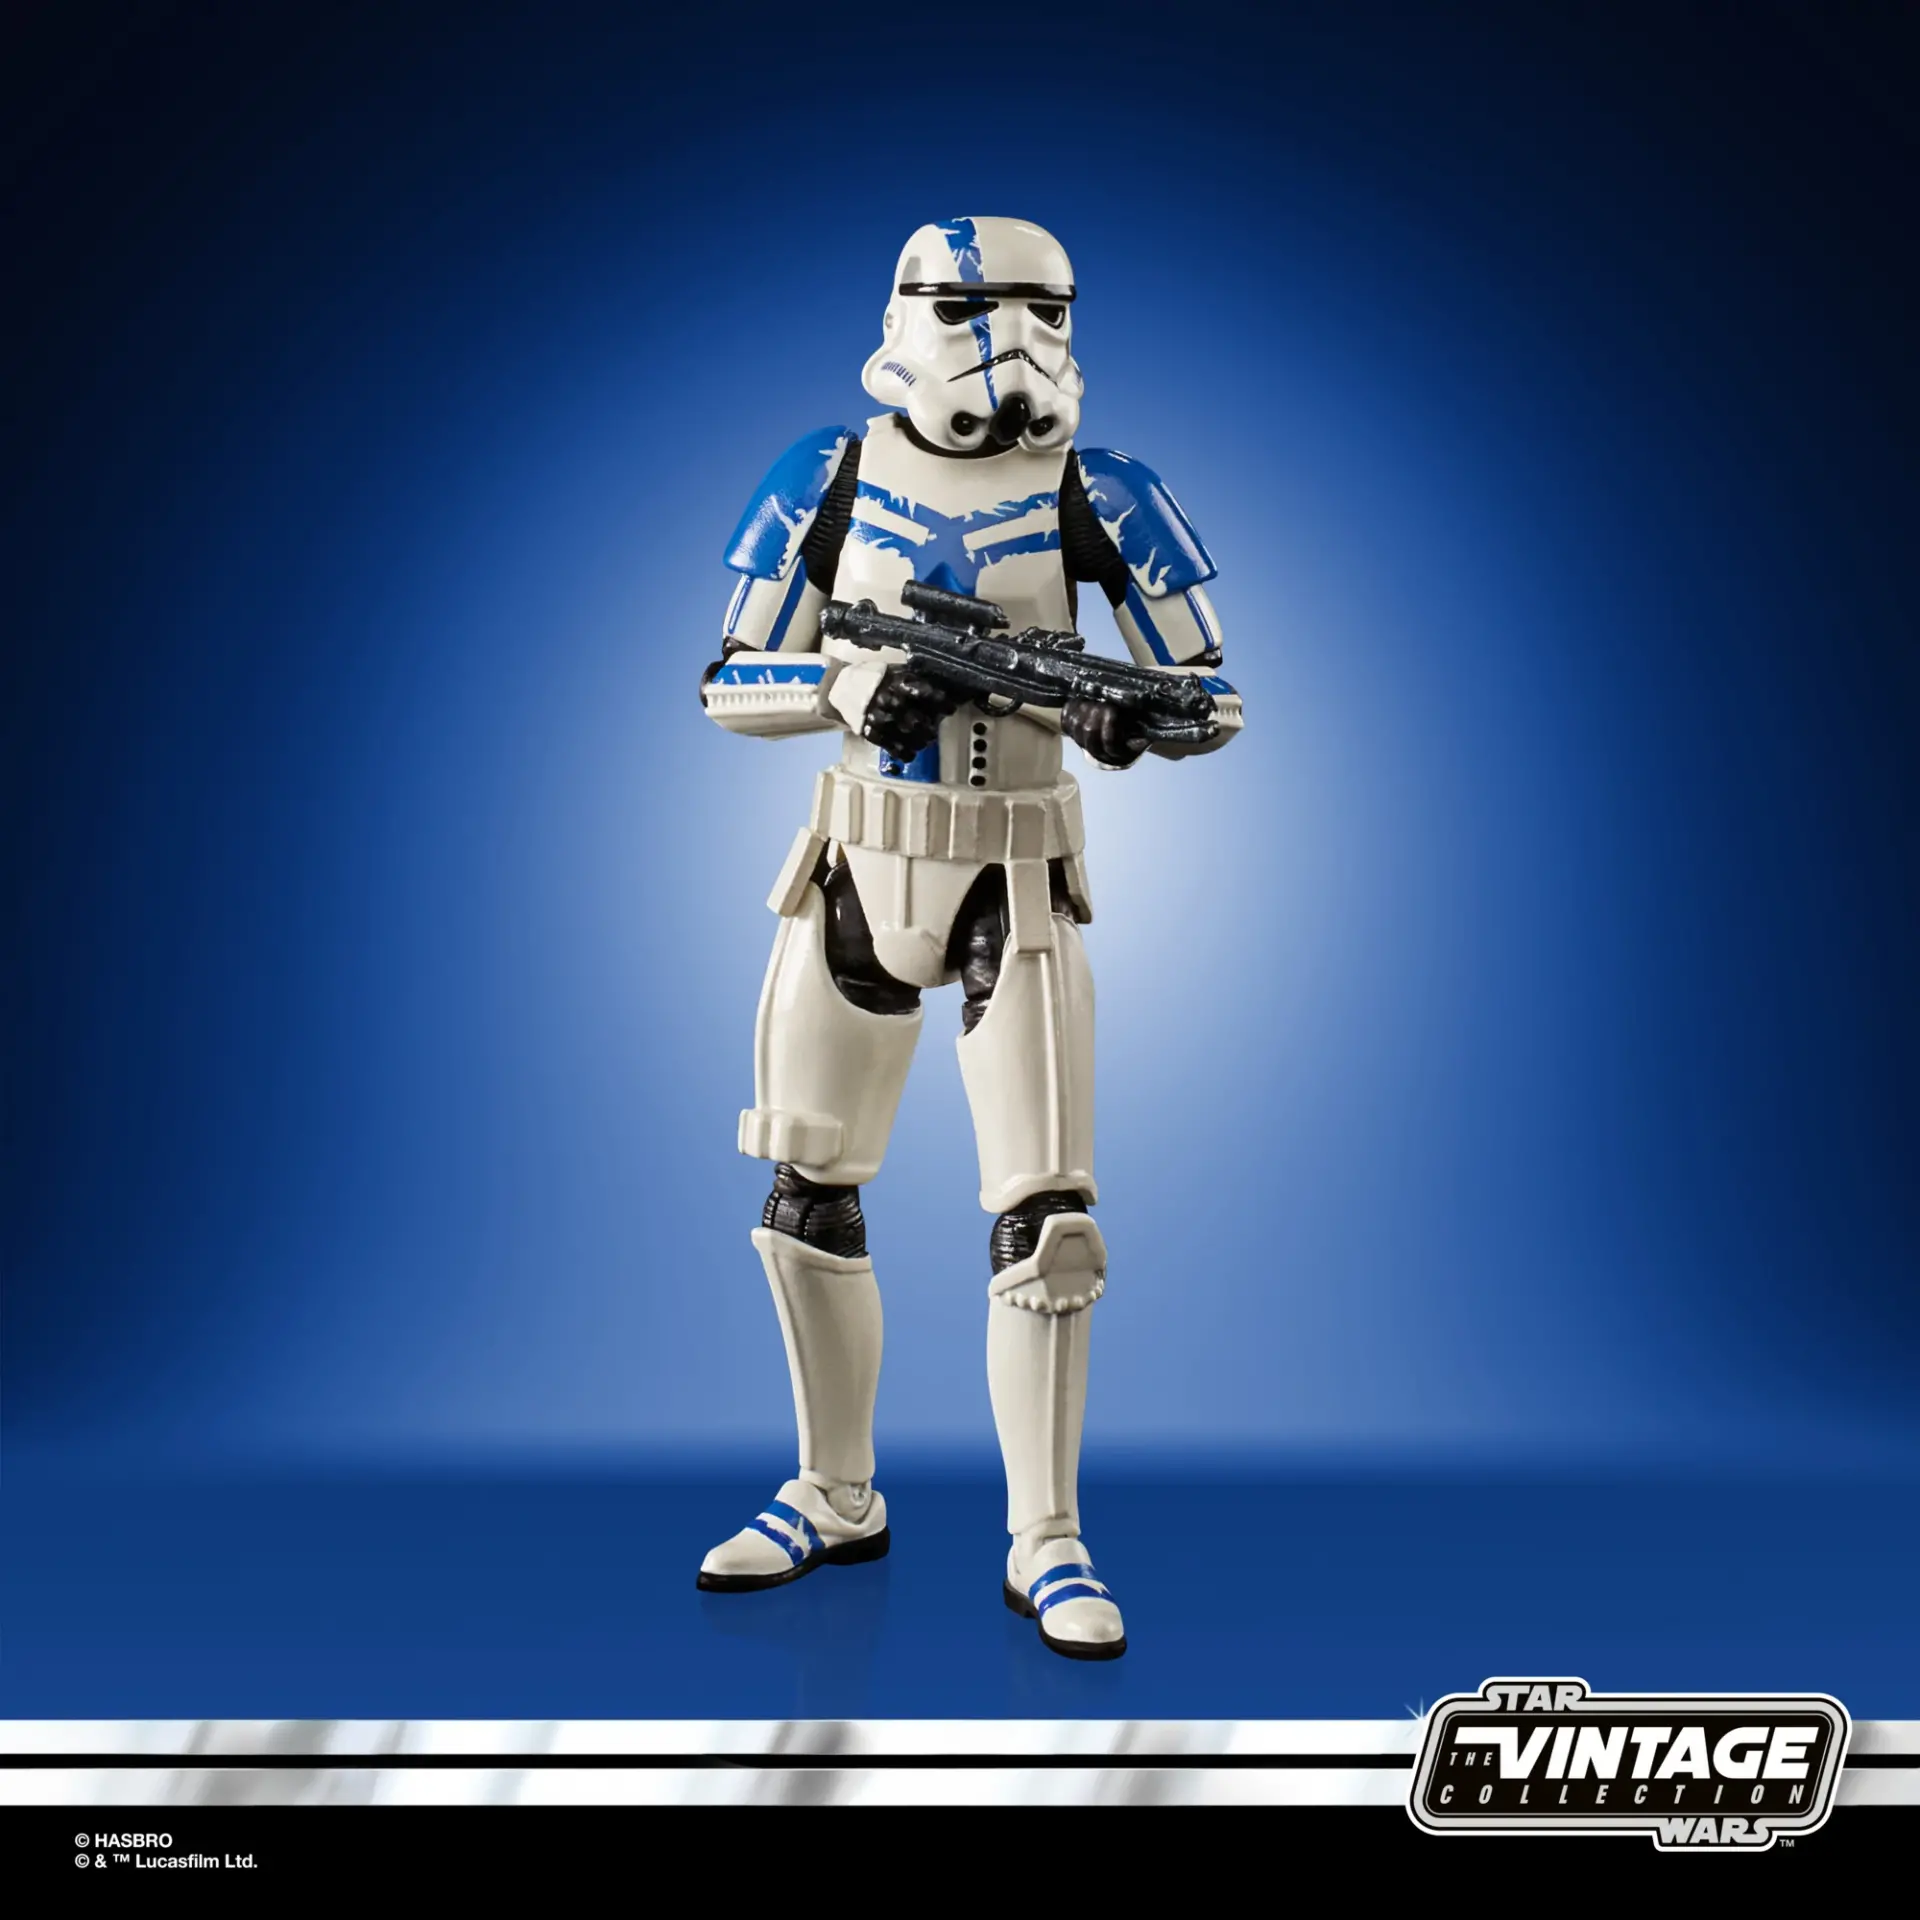 Star wars the vintage collection gaming greats stormtrooper commander jawascave 1